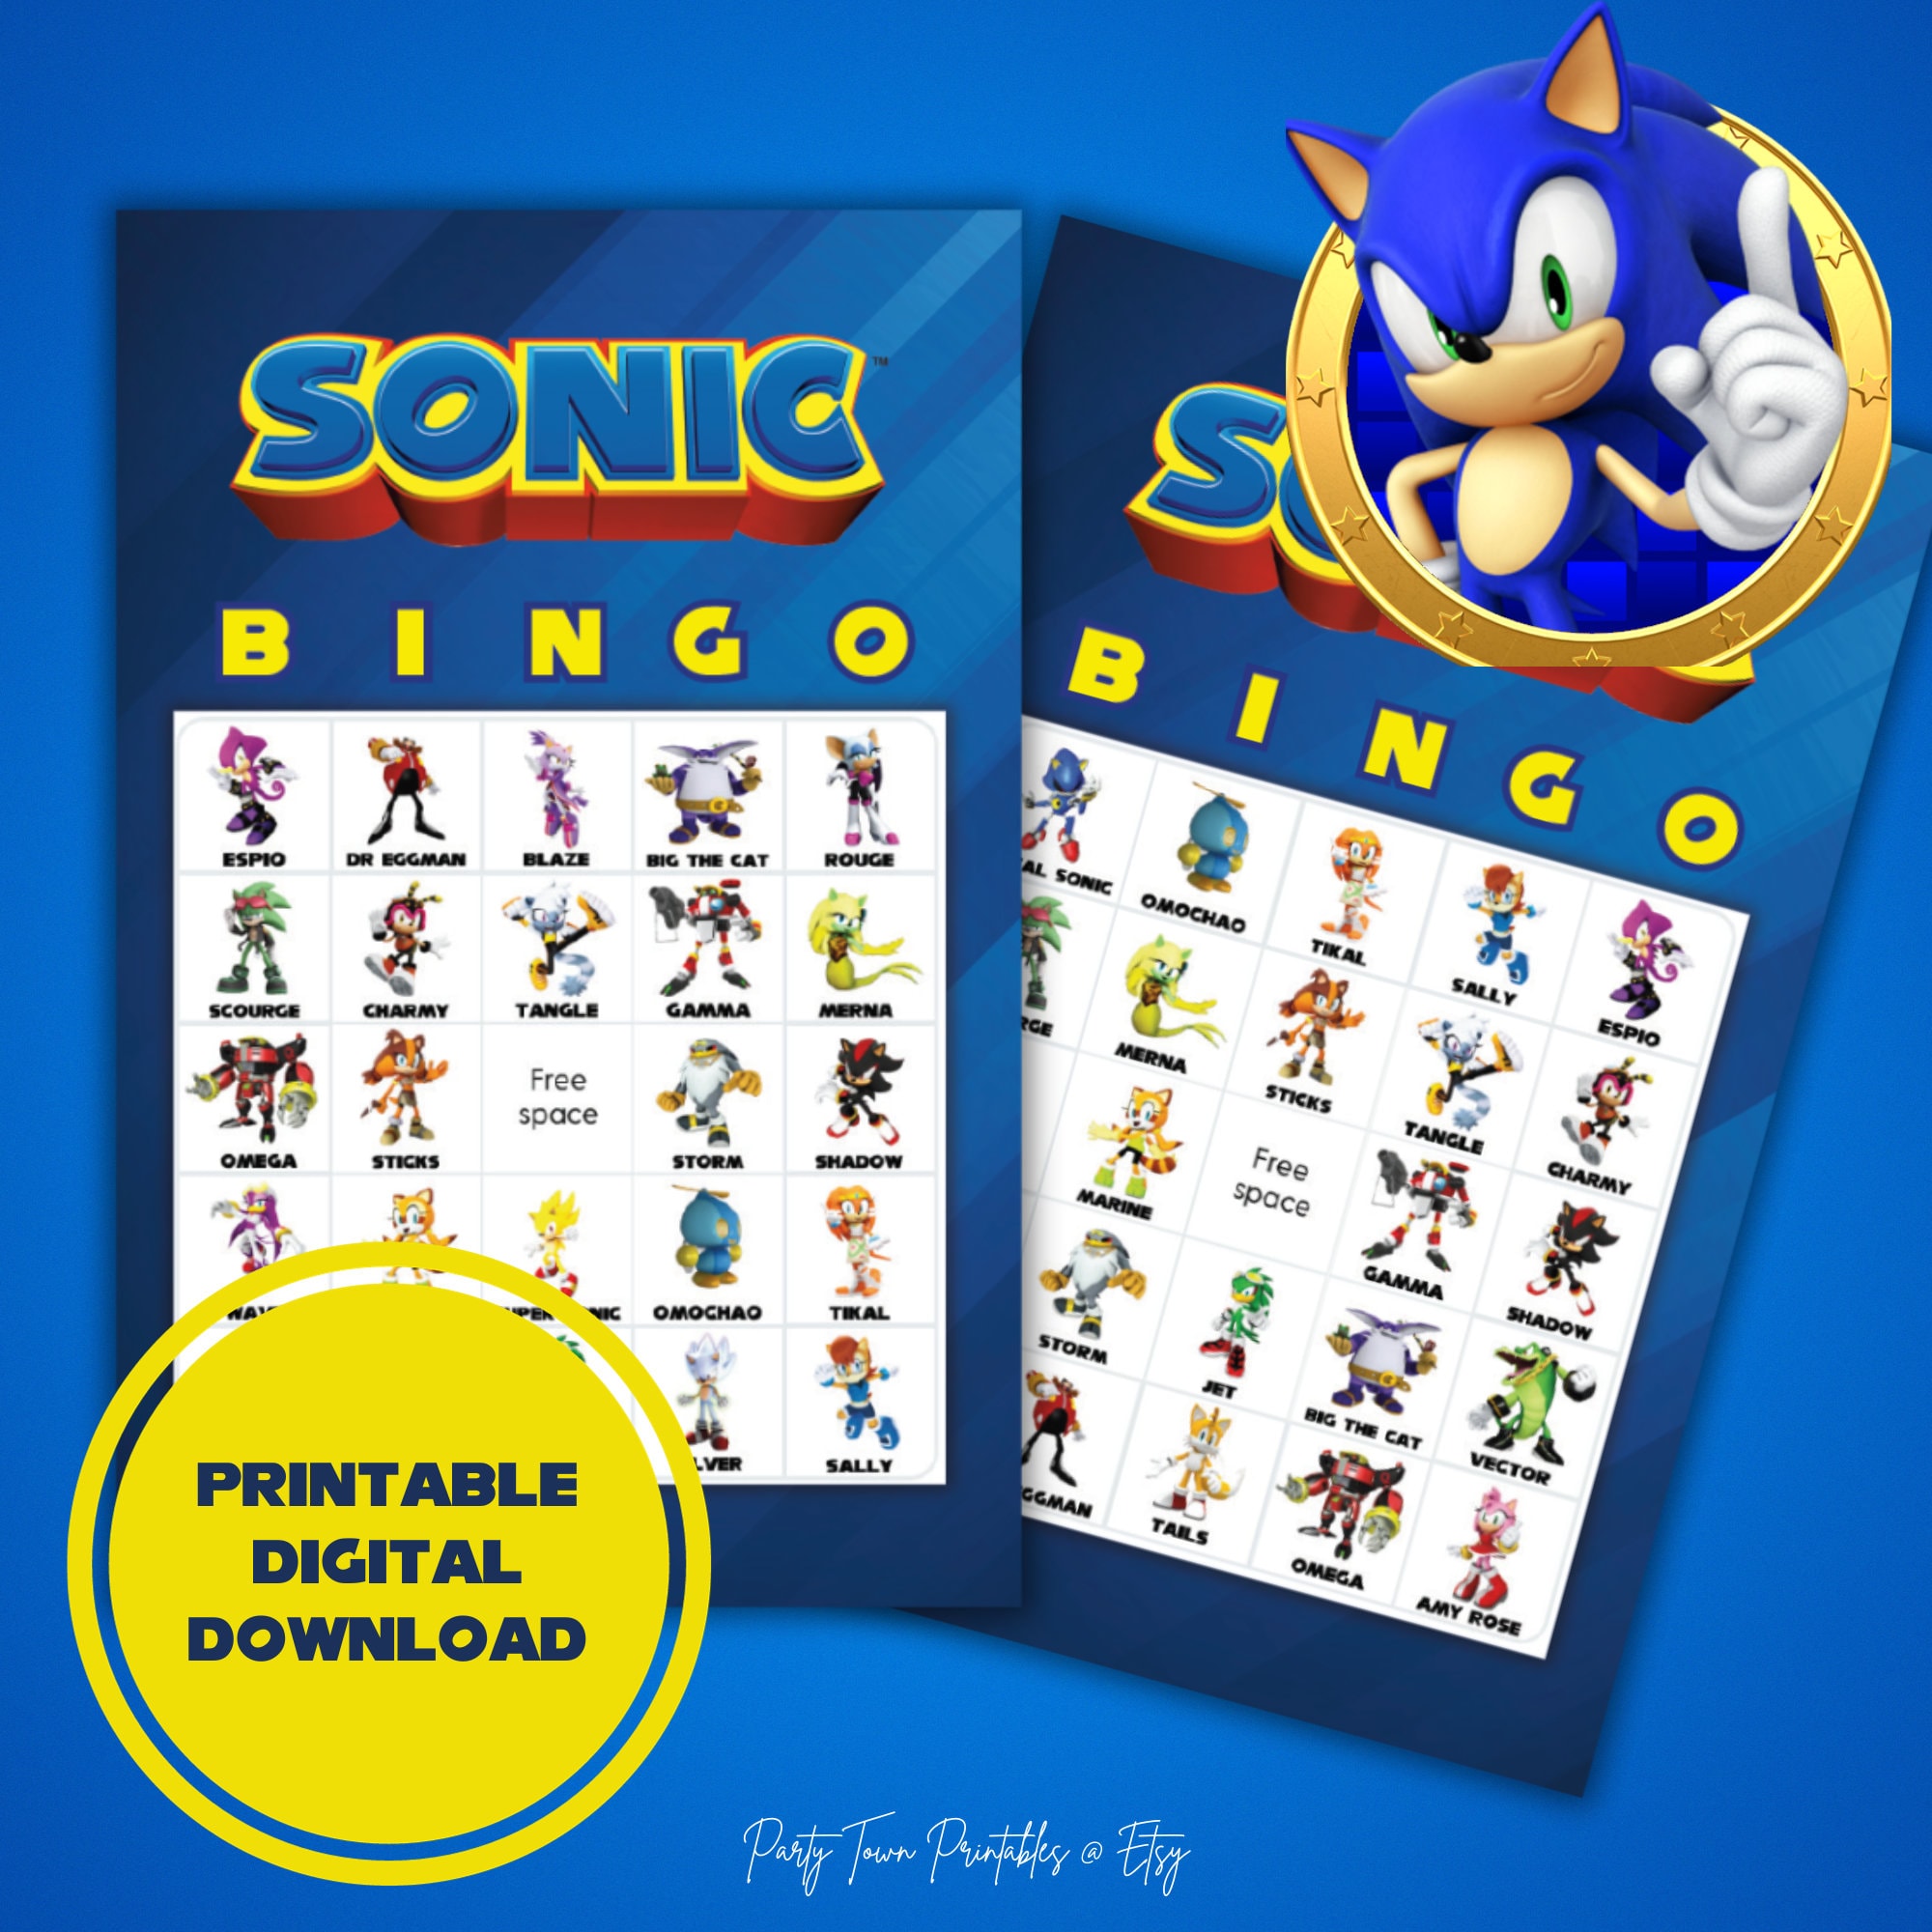 Sonic 5 Power Rings in a Gift Bag 